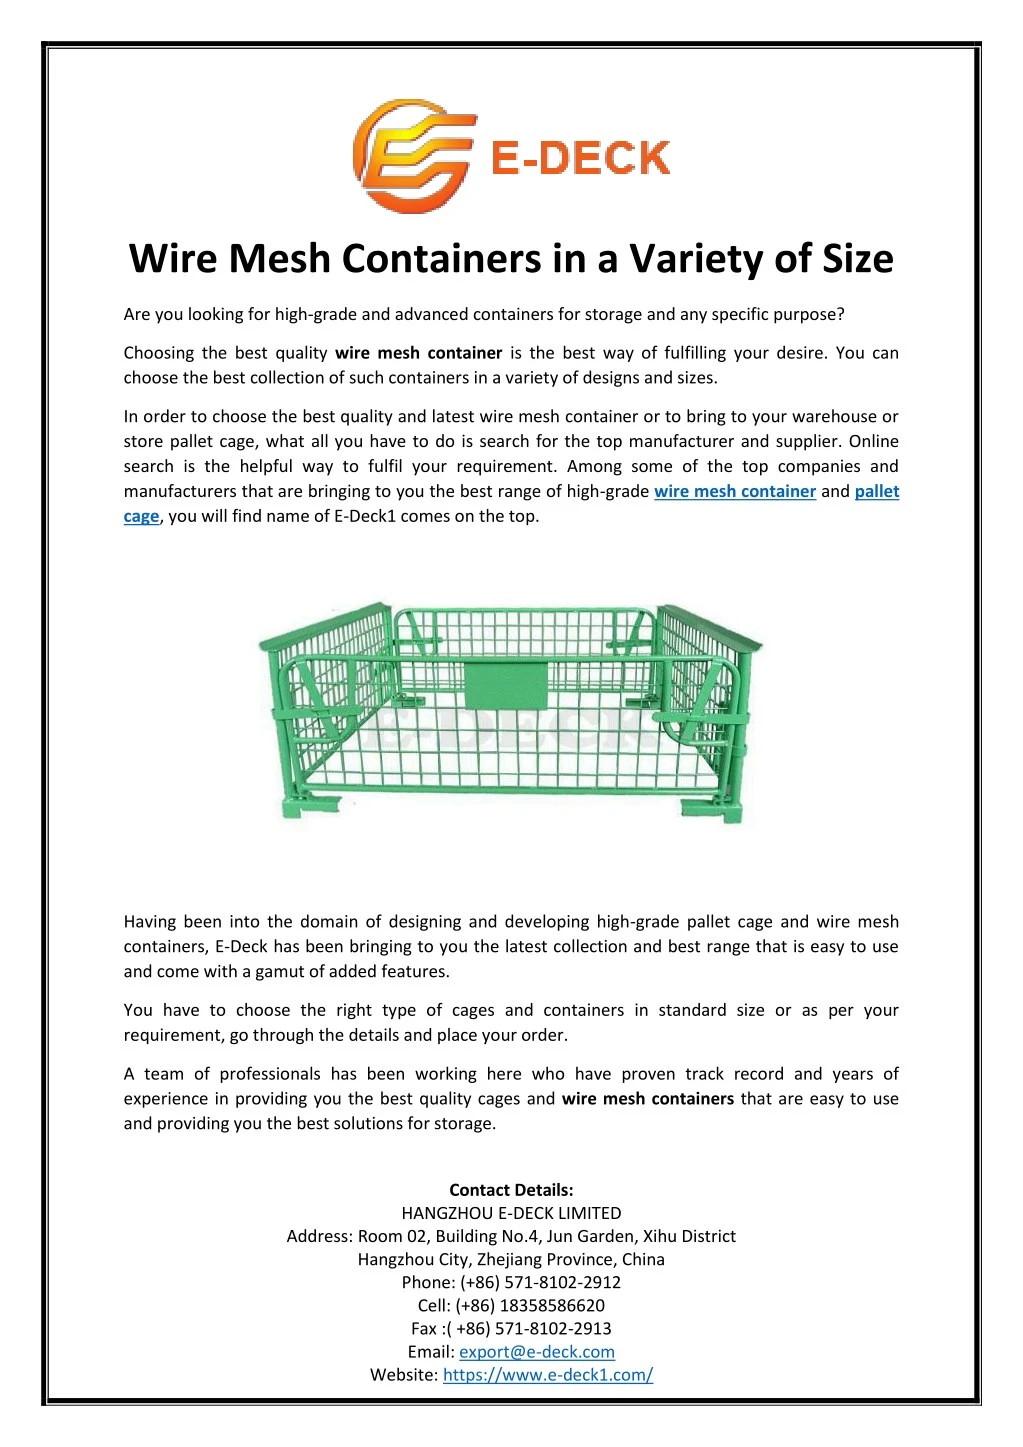 wire mesh containers in a variety of size